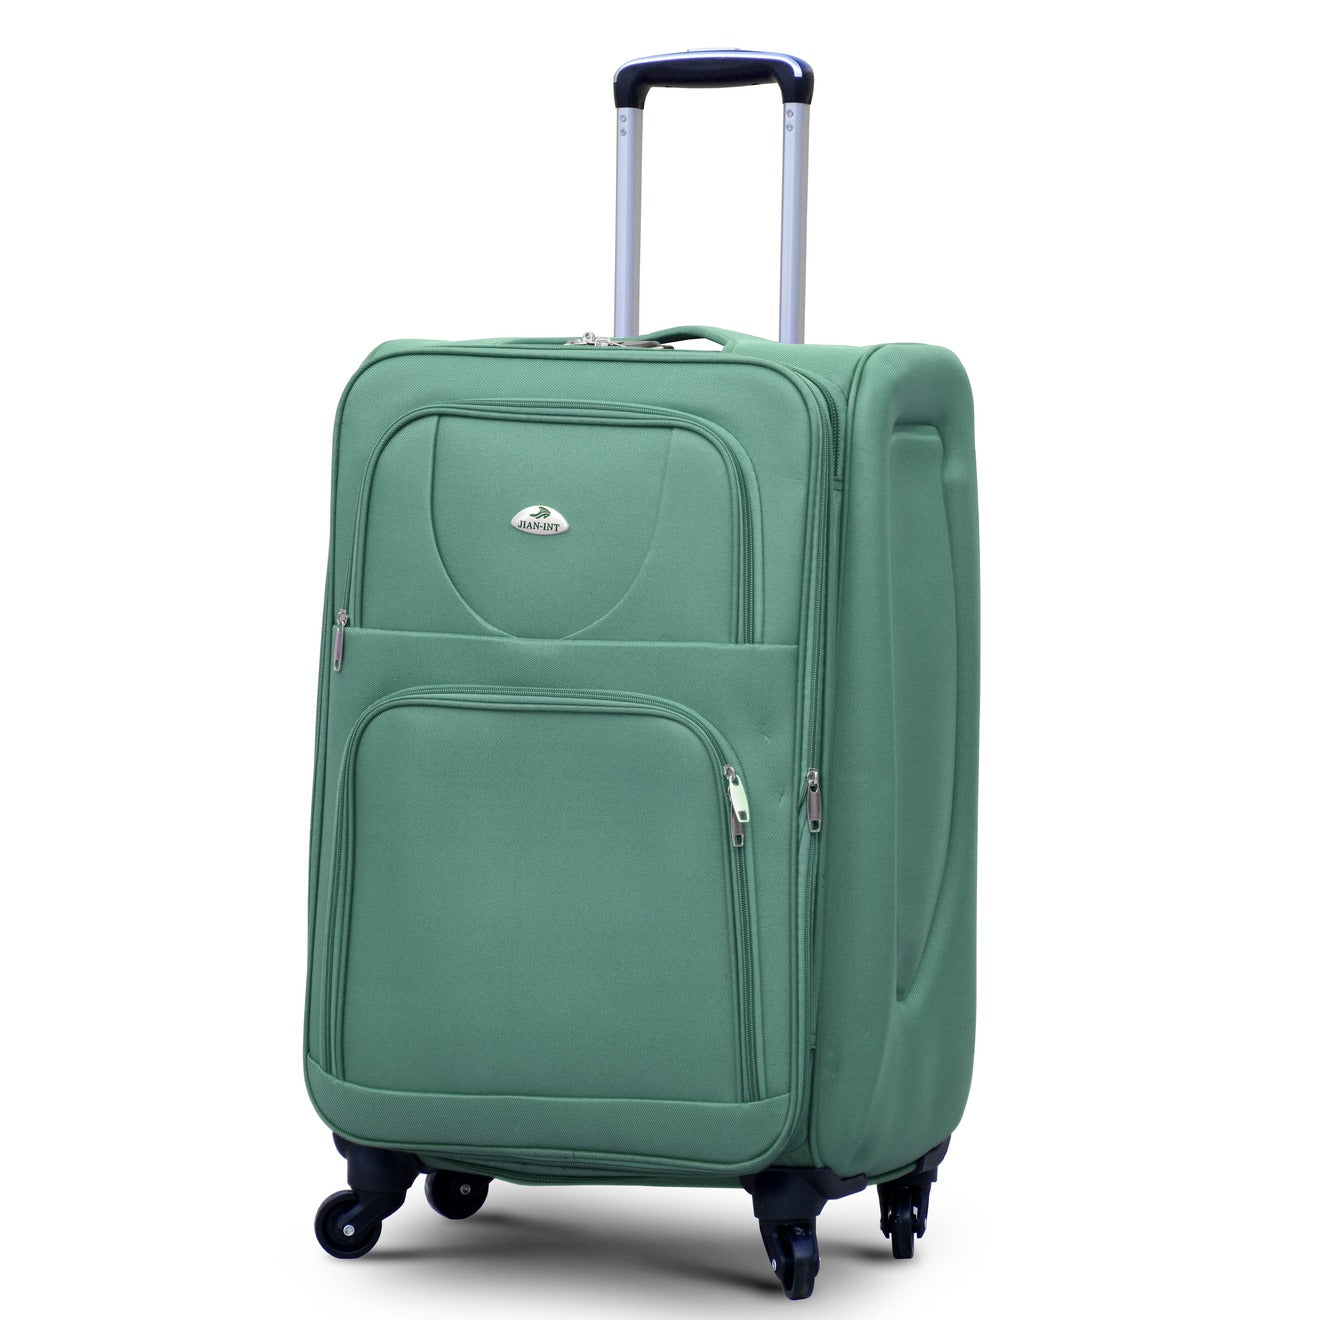 20" Green Colour SJ JIAN 4 Wheel Luggage Lightweight Soft Material Carry On Trolley Bag